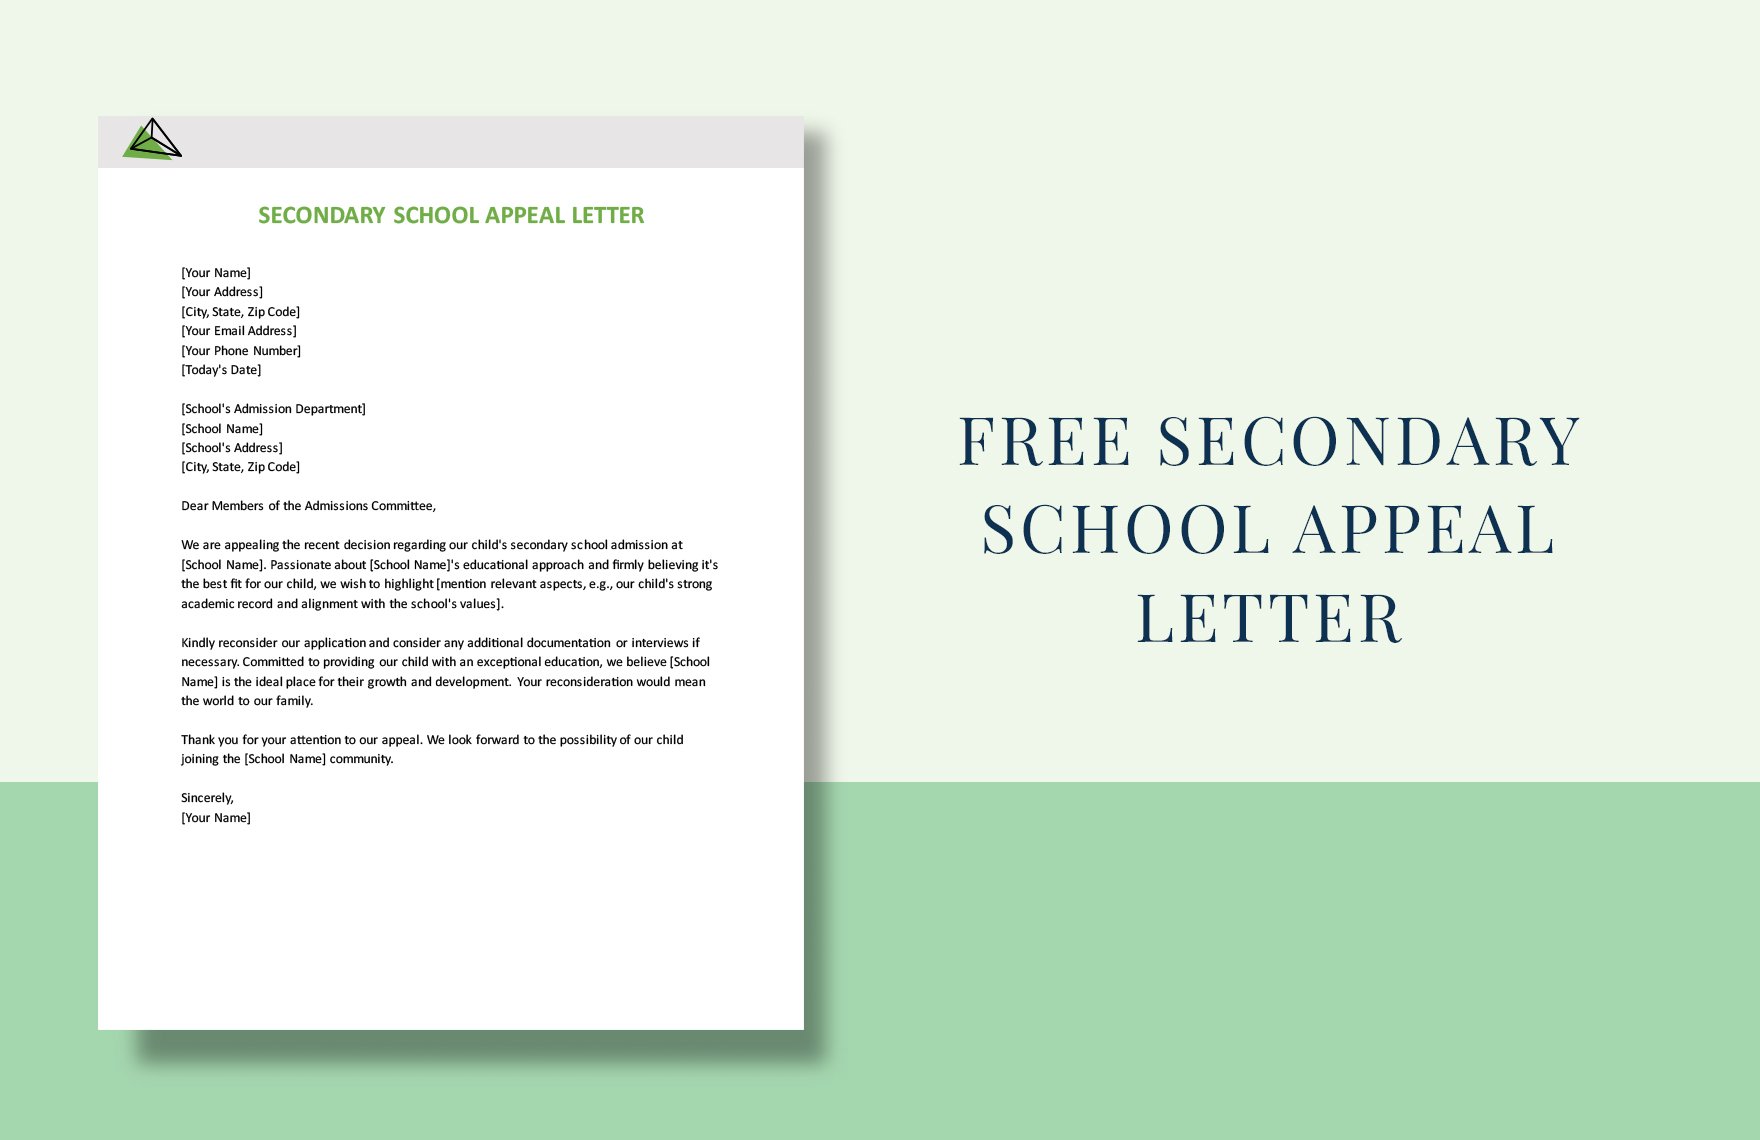 Secondary School Appeal Letter